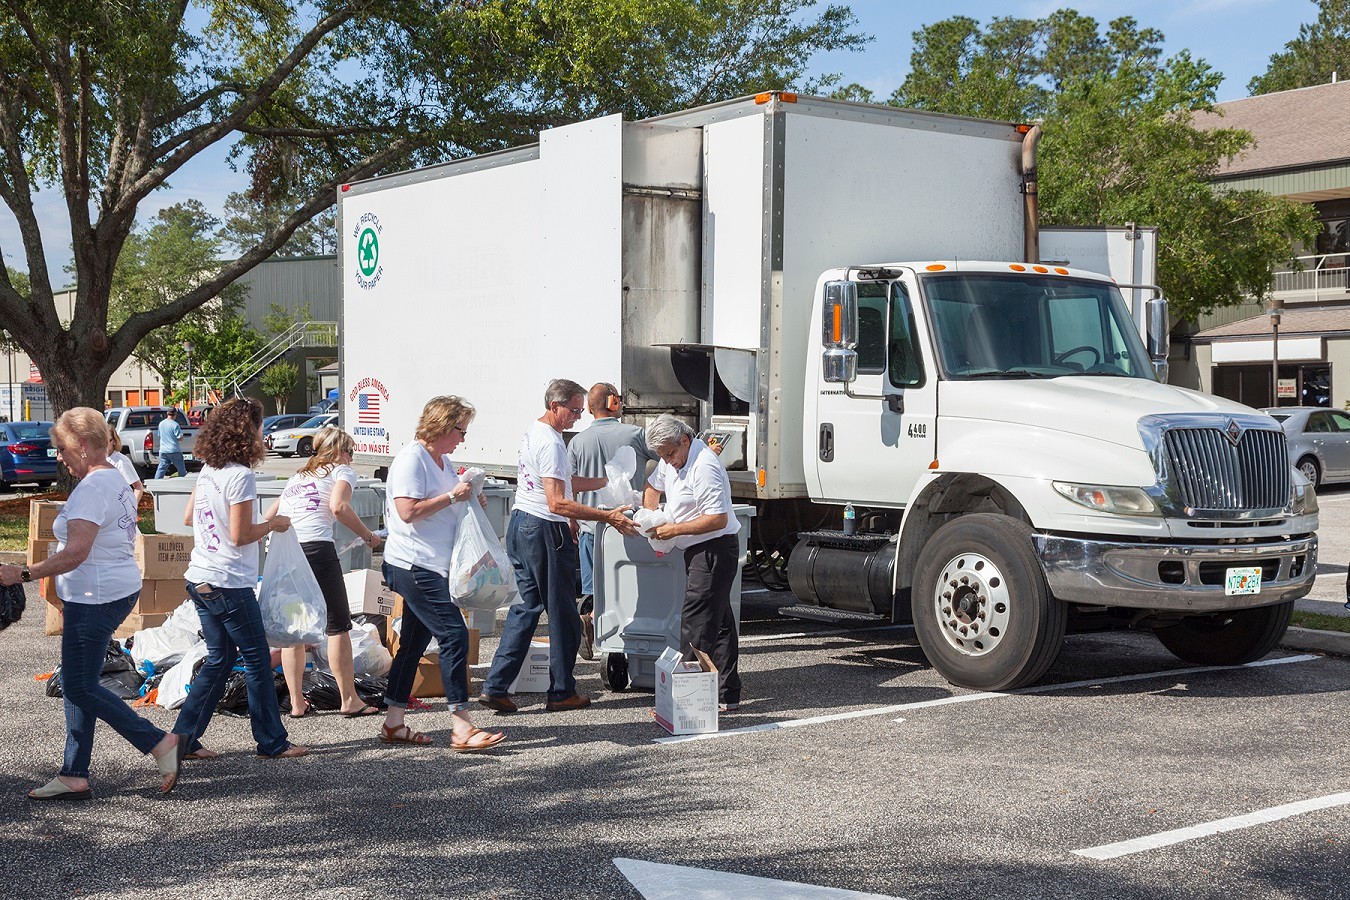 Berkshire Hathaway HomeServices Florida Network Realty’s Mandarin/St. Johns branch office recently hosted a shredding event and food drive.